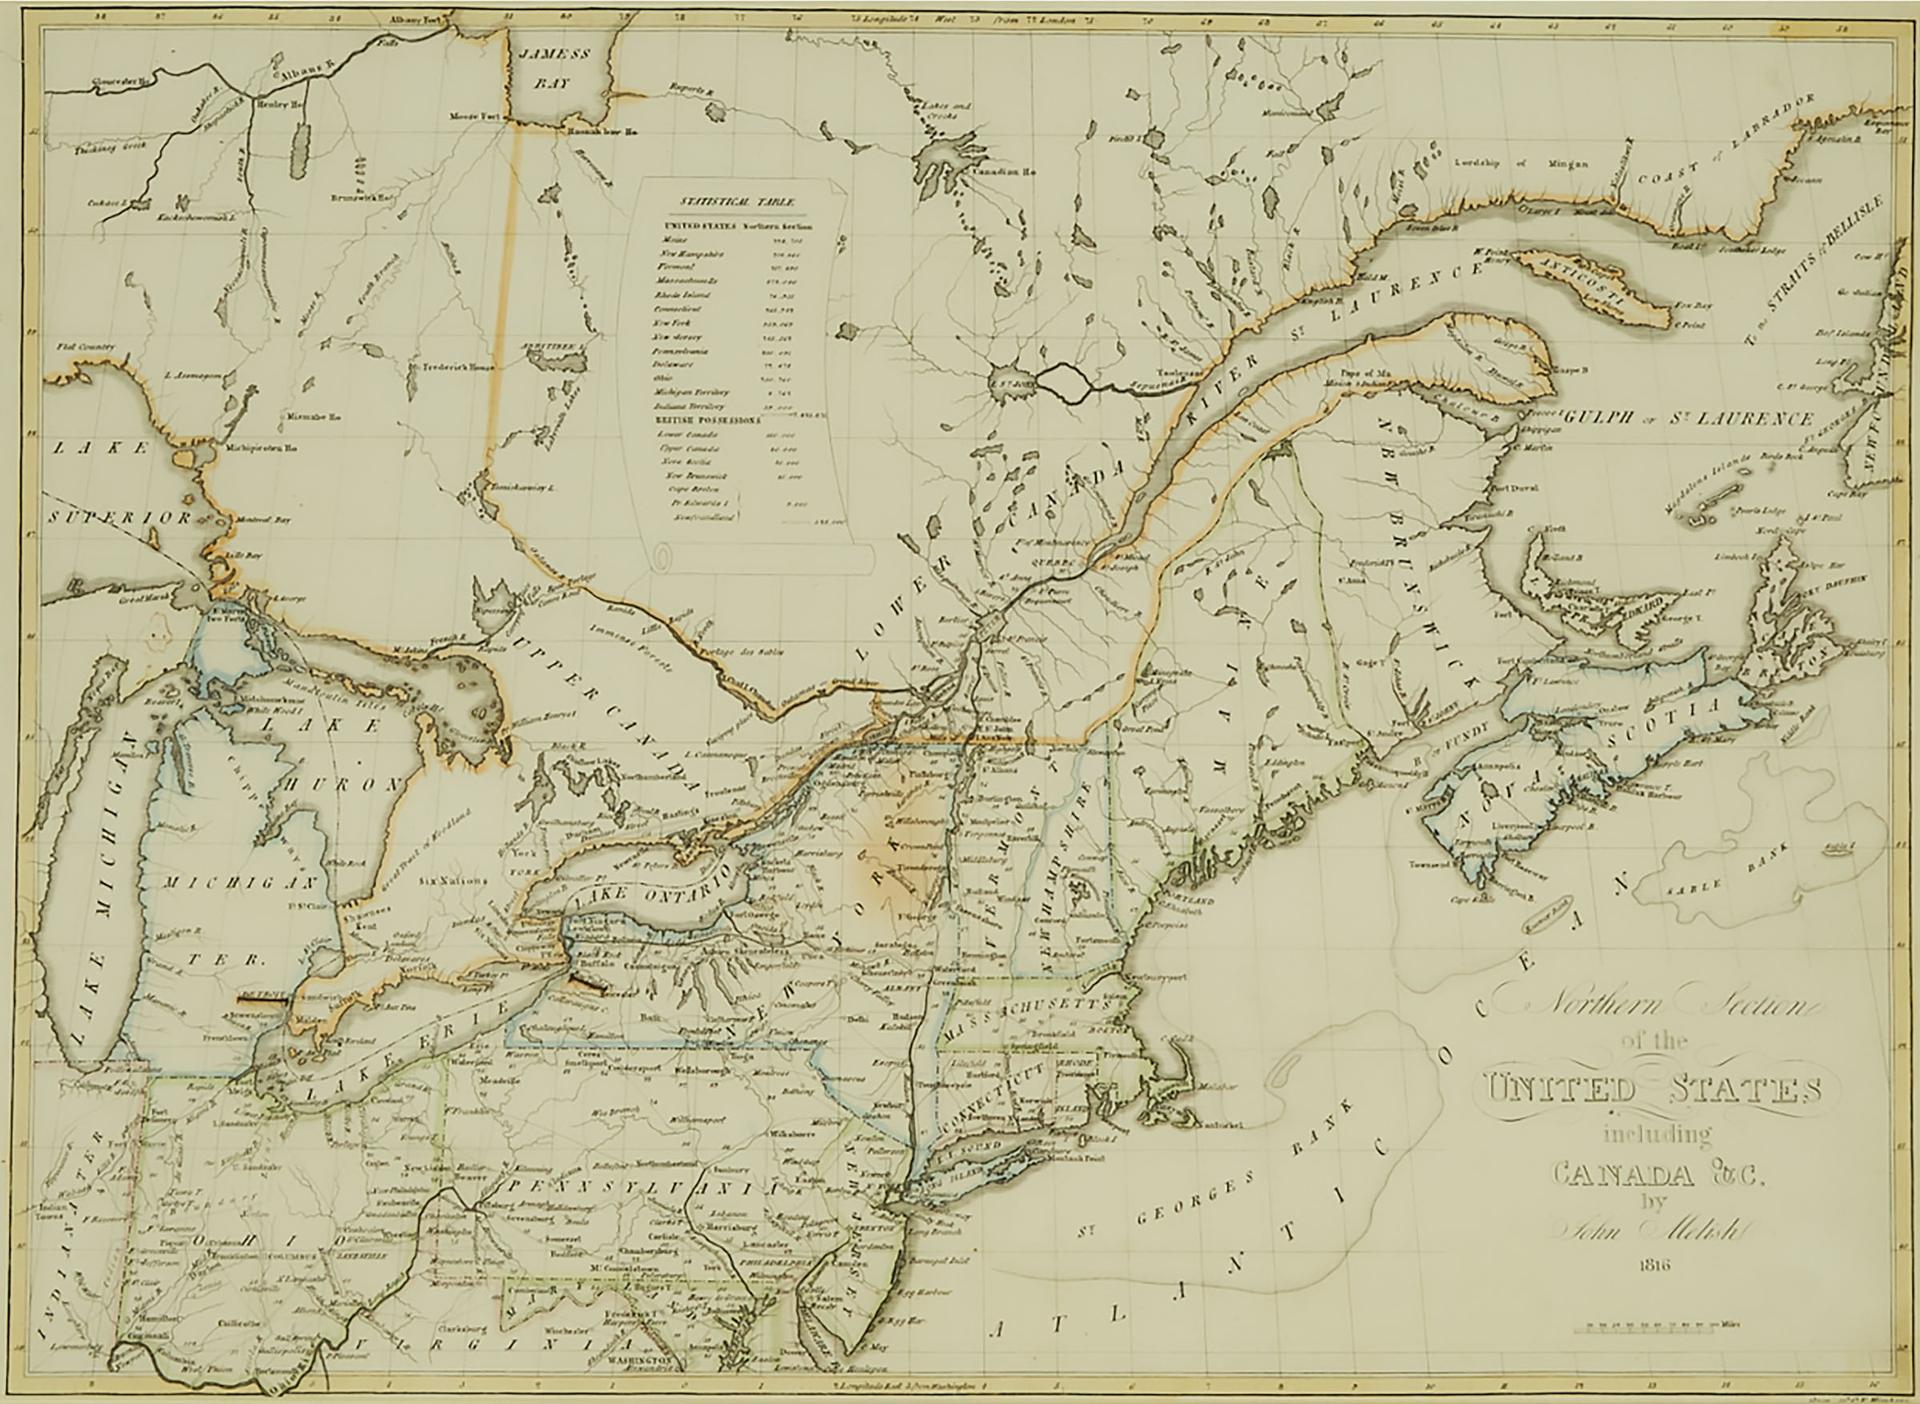 John Melish - Northern Section Of The United States Including Canada &C., 1816